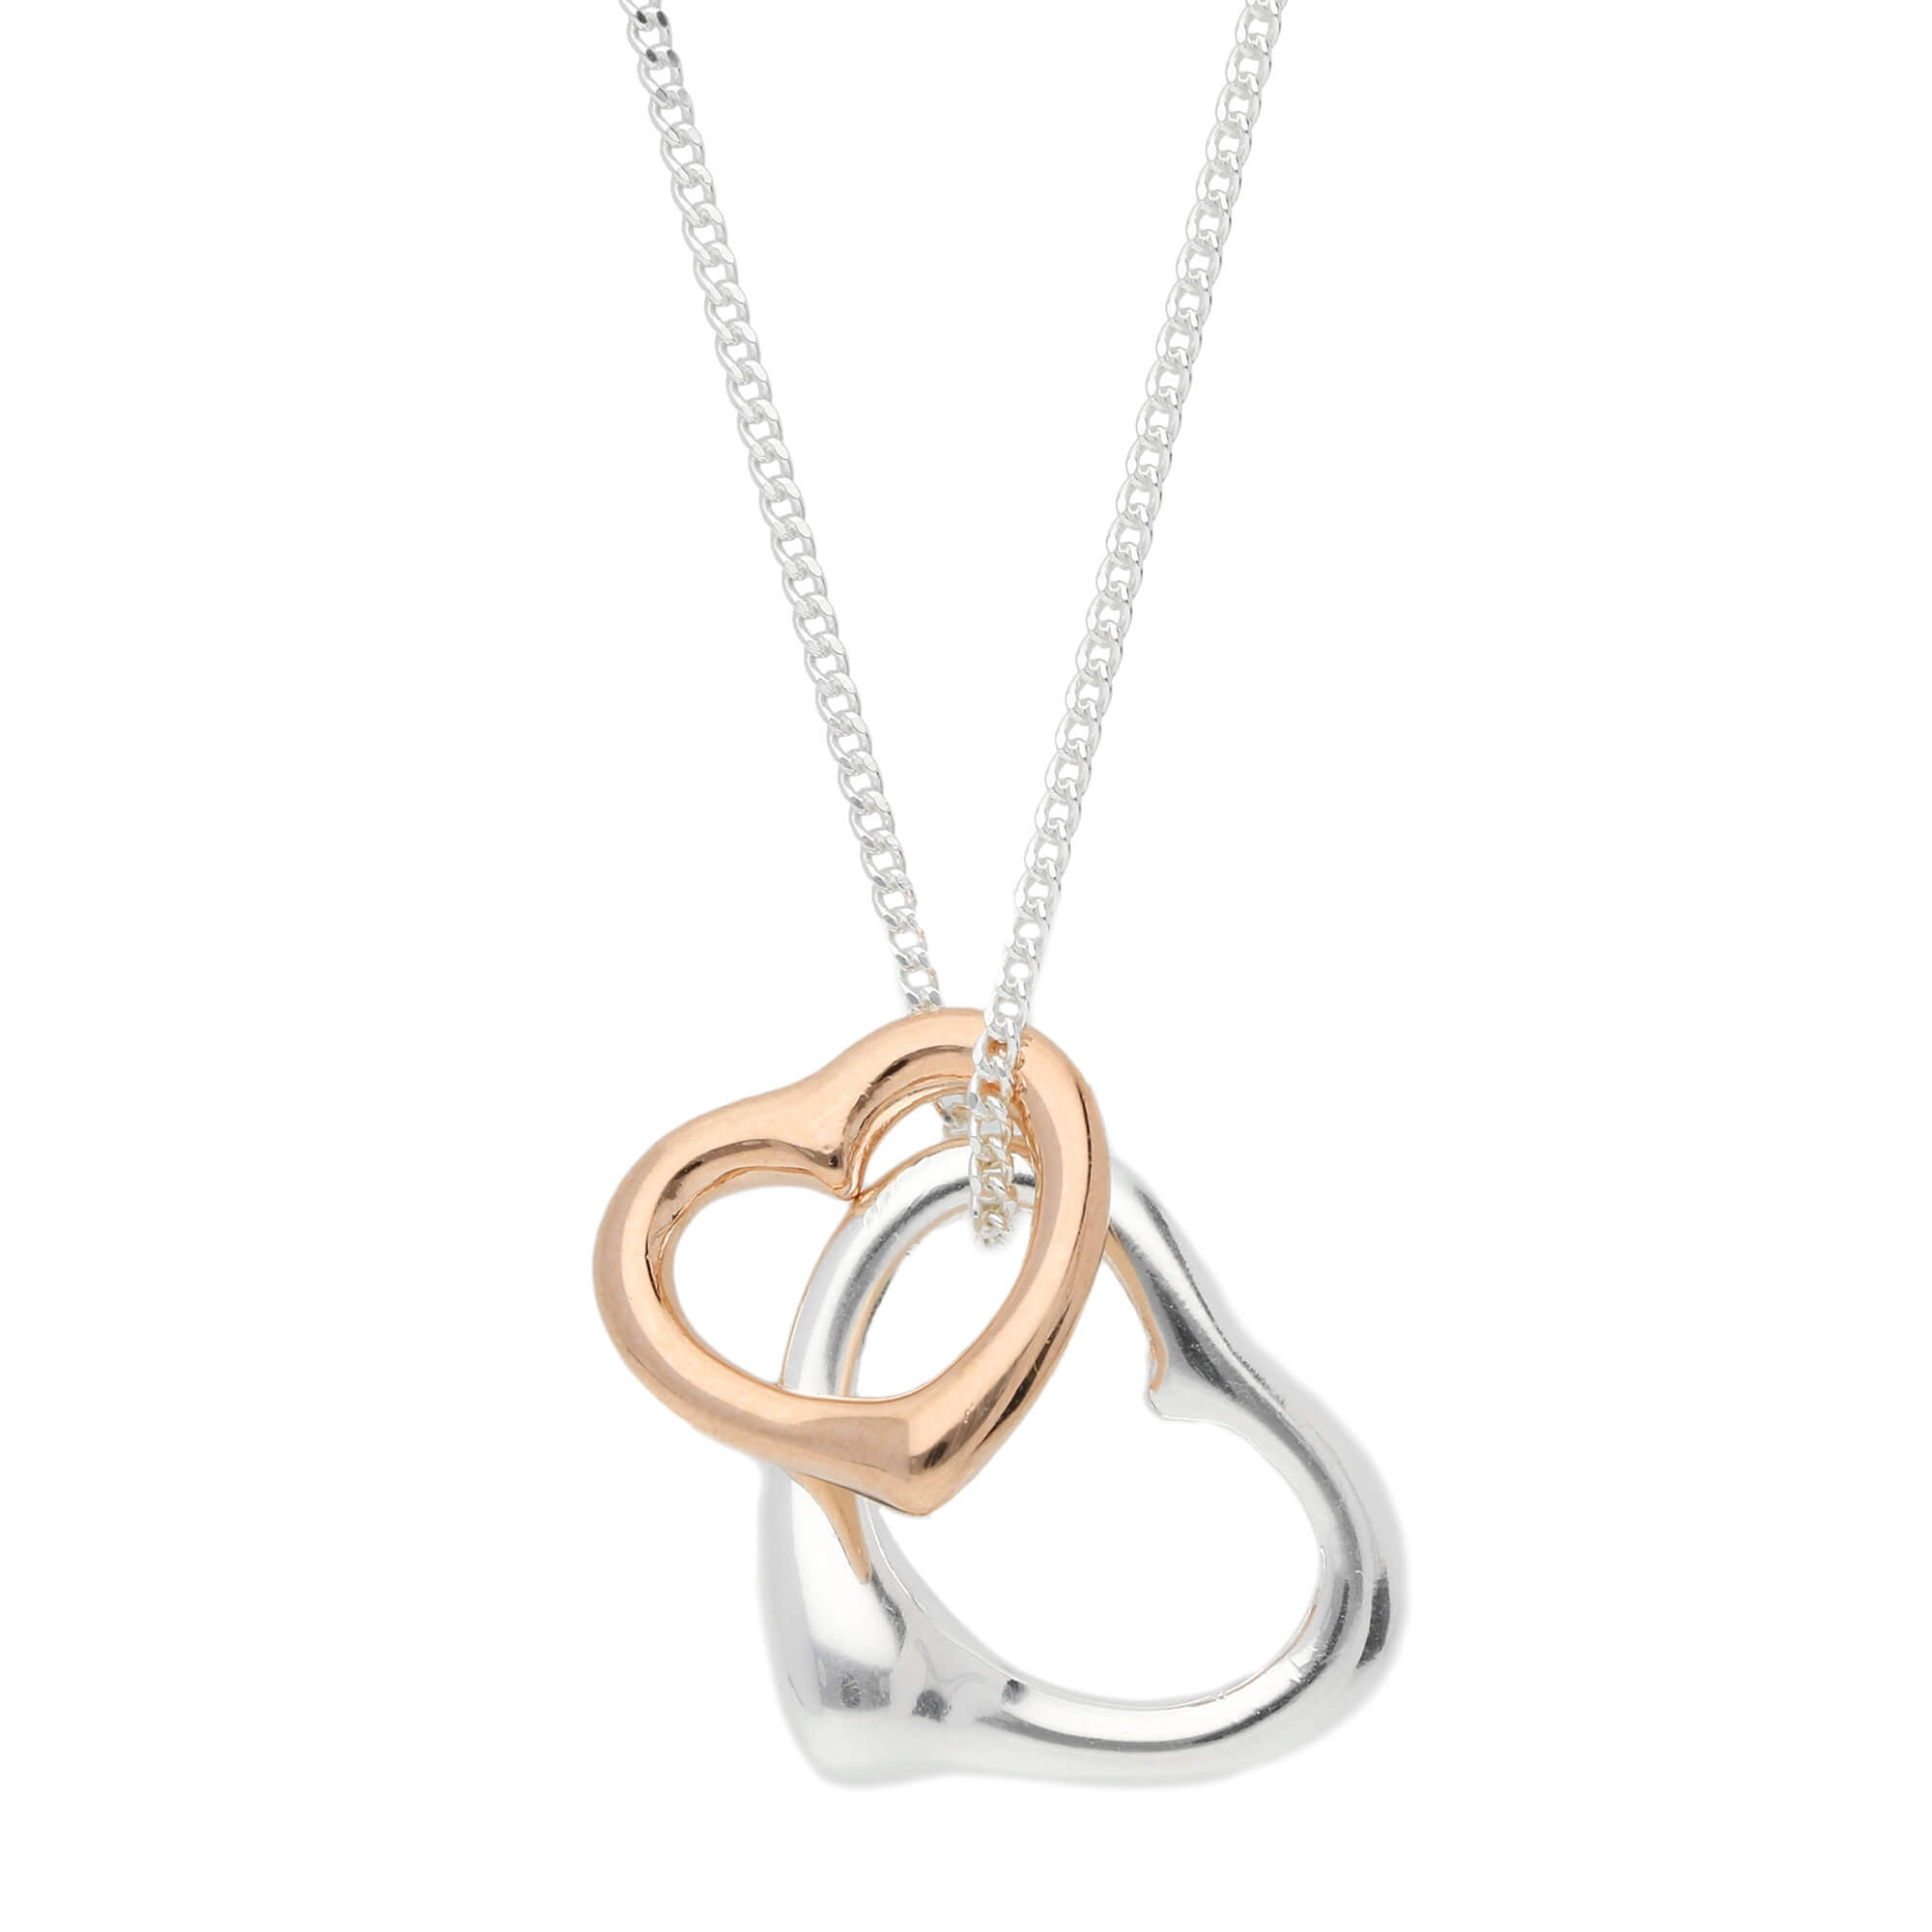 ANAZOZ Stainless Steel Pendant Necklace Lovers Semi-Hollow Rectangle Small Cross CZ Silver and Rose Golden Forever Love 